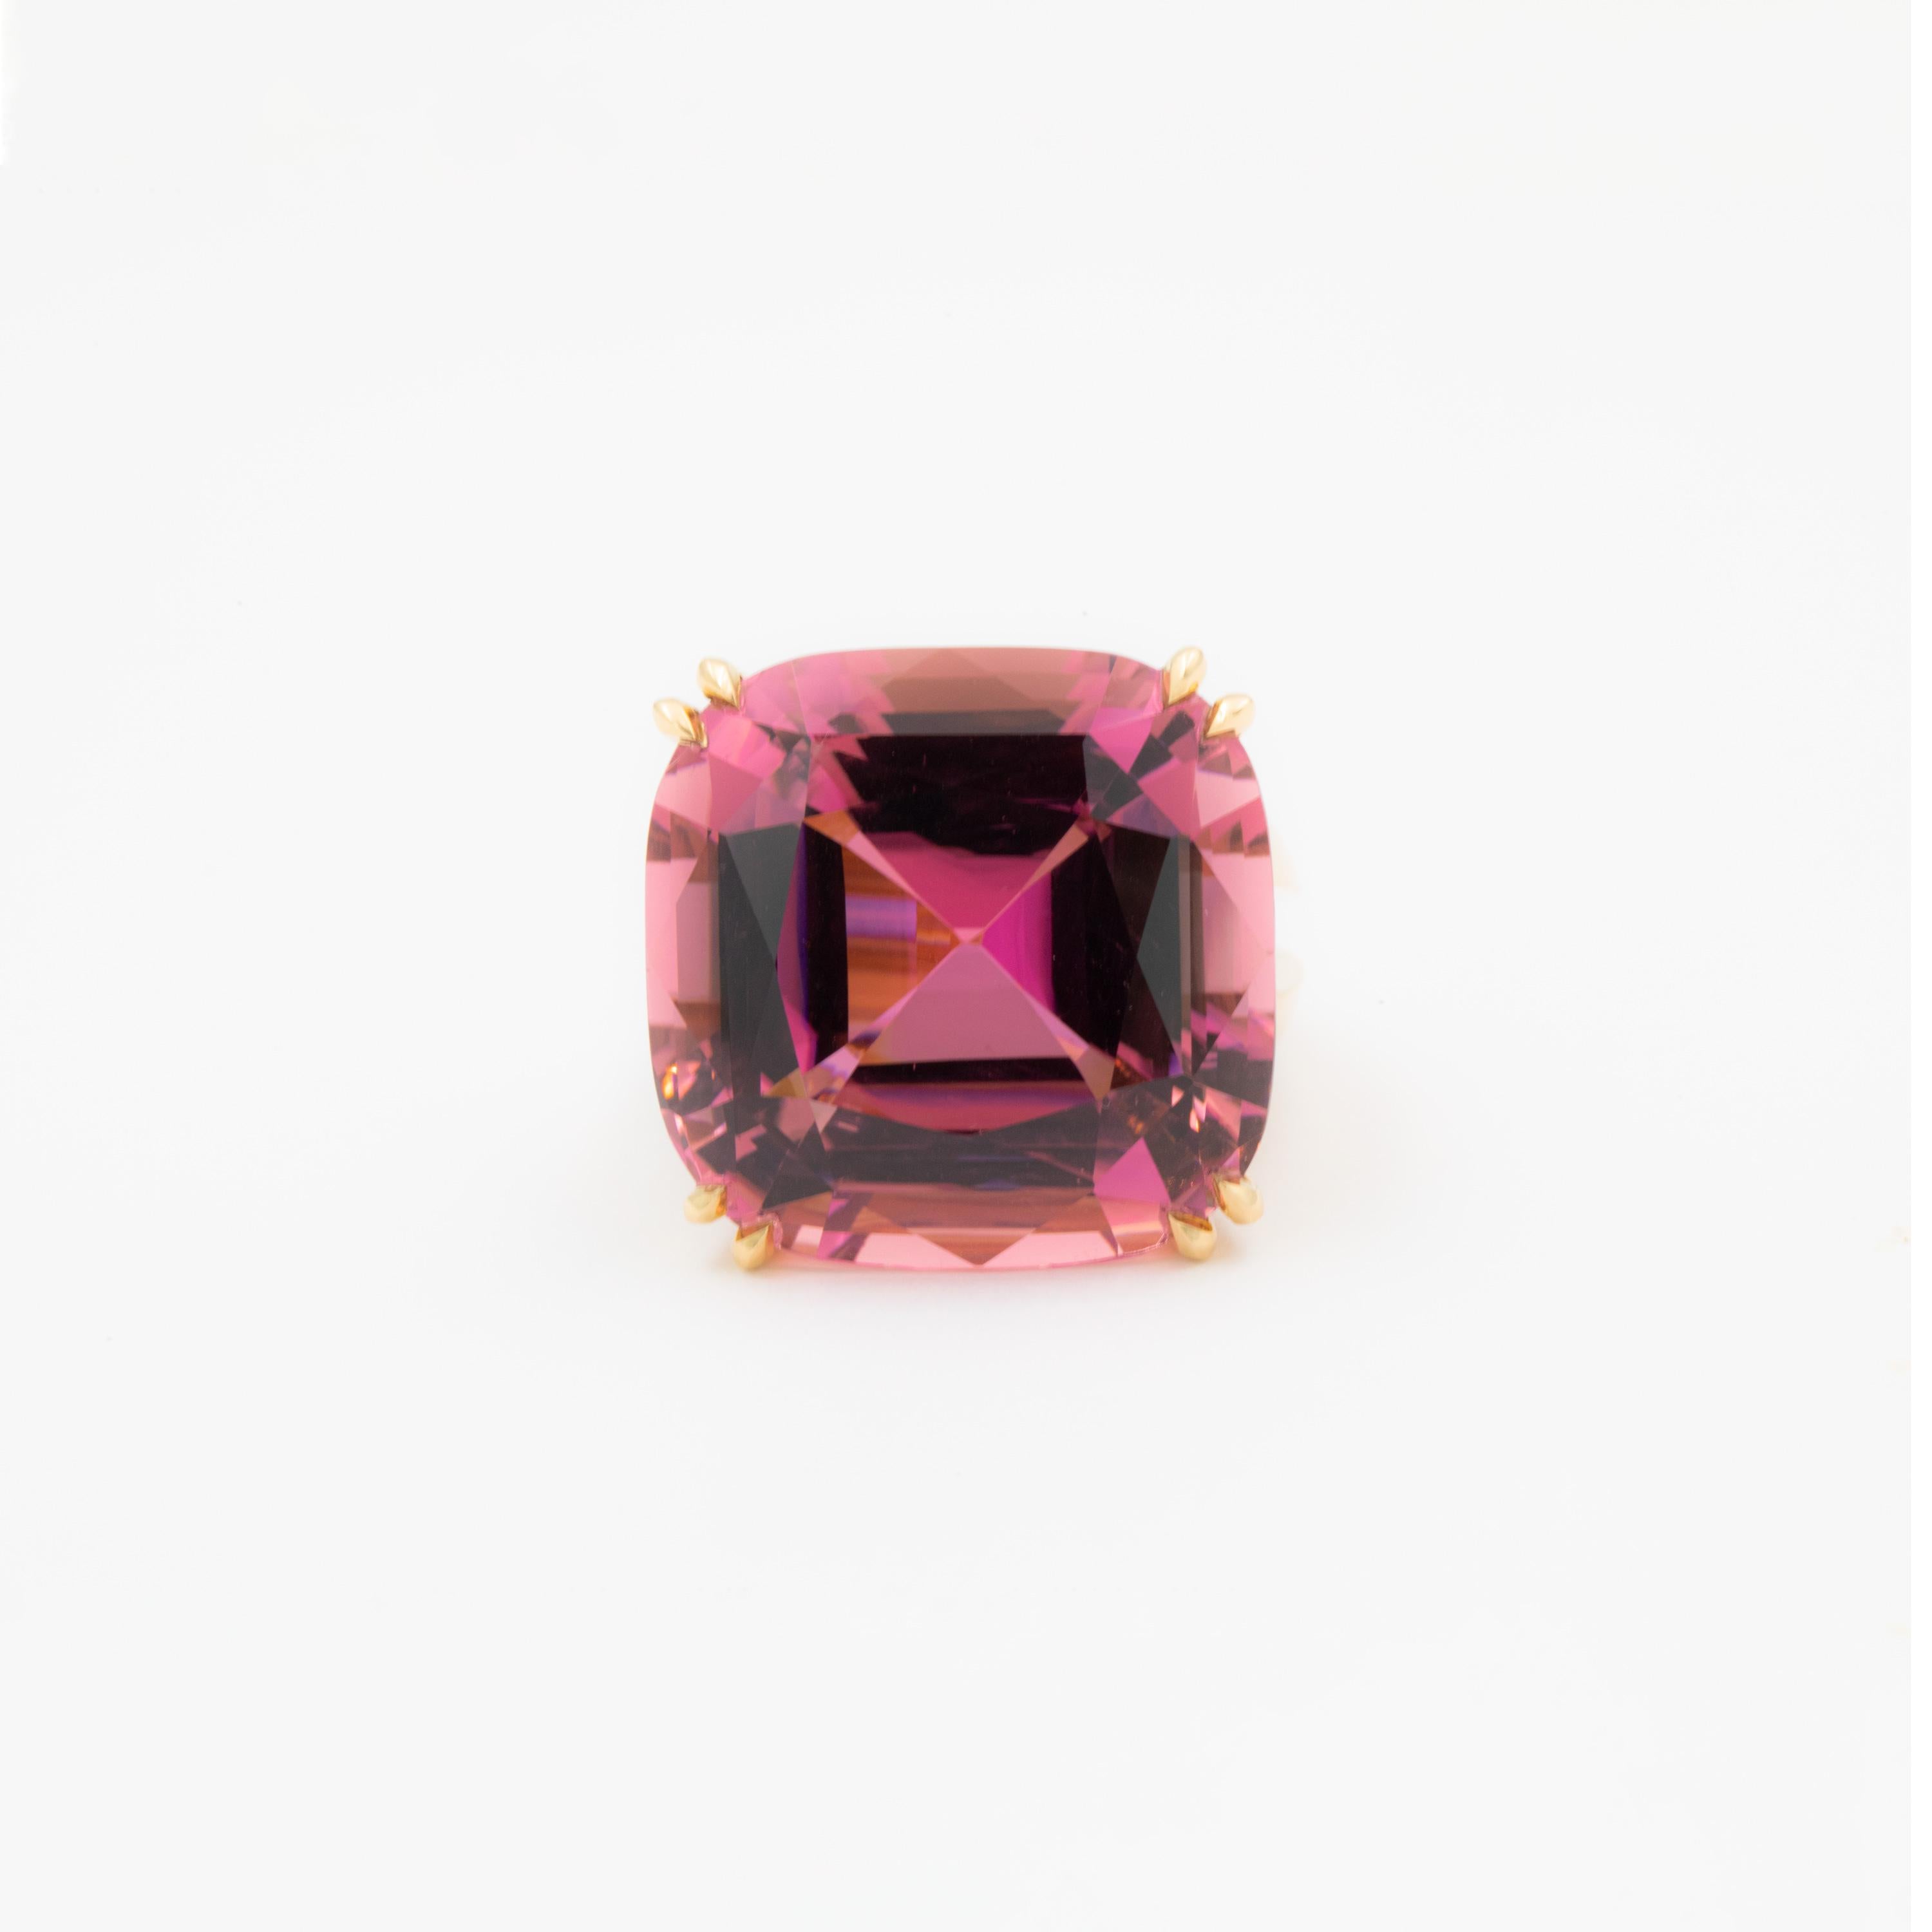 The opulent 55 carat Tourmaline set in this stunning piece was sourced in Mozambique and captivates with its vibrant rose-like color. Its cushion-cut shape perfectly emphasizes the natural vibrance of the deep yet light color of the stone. Designed